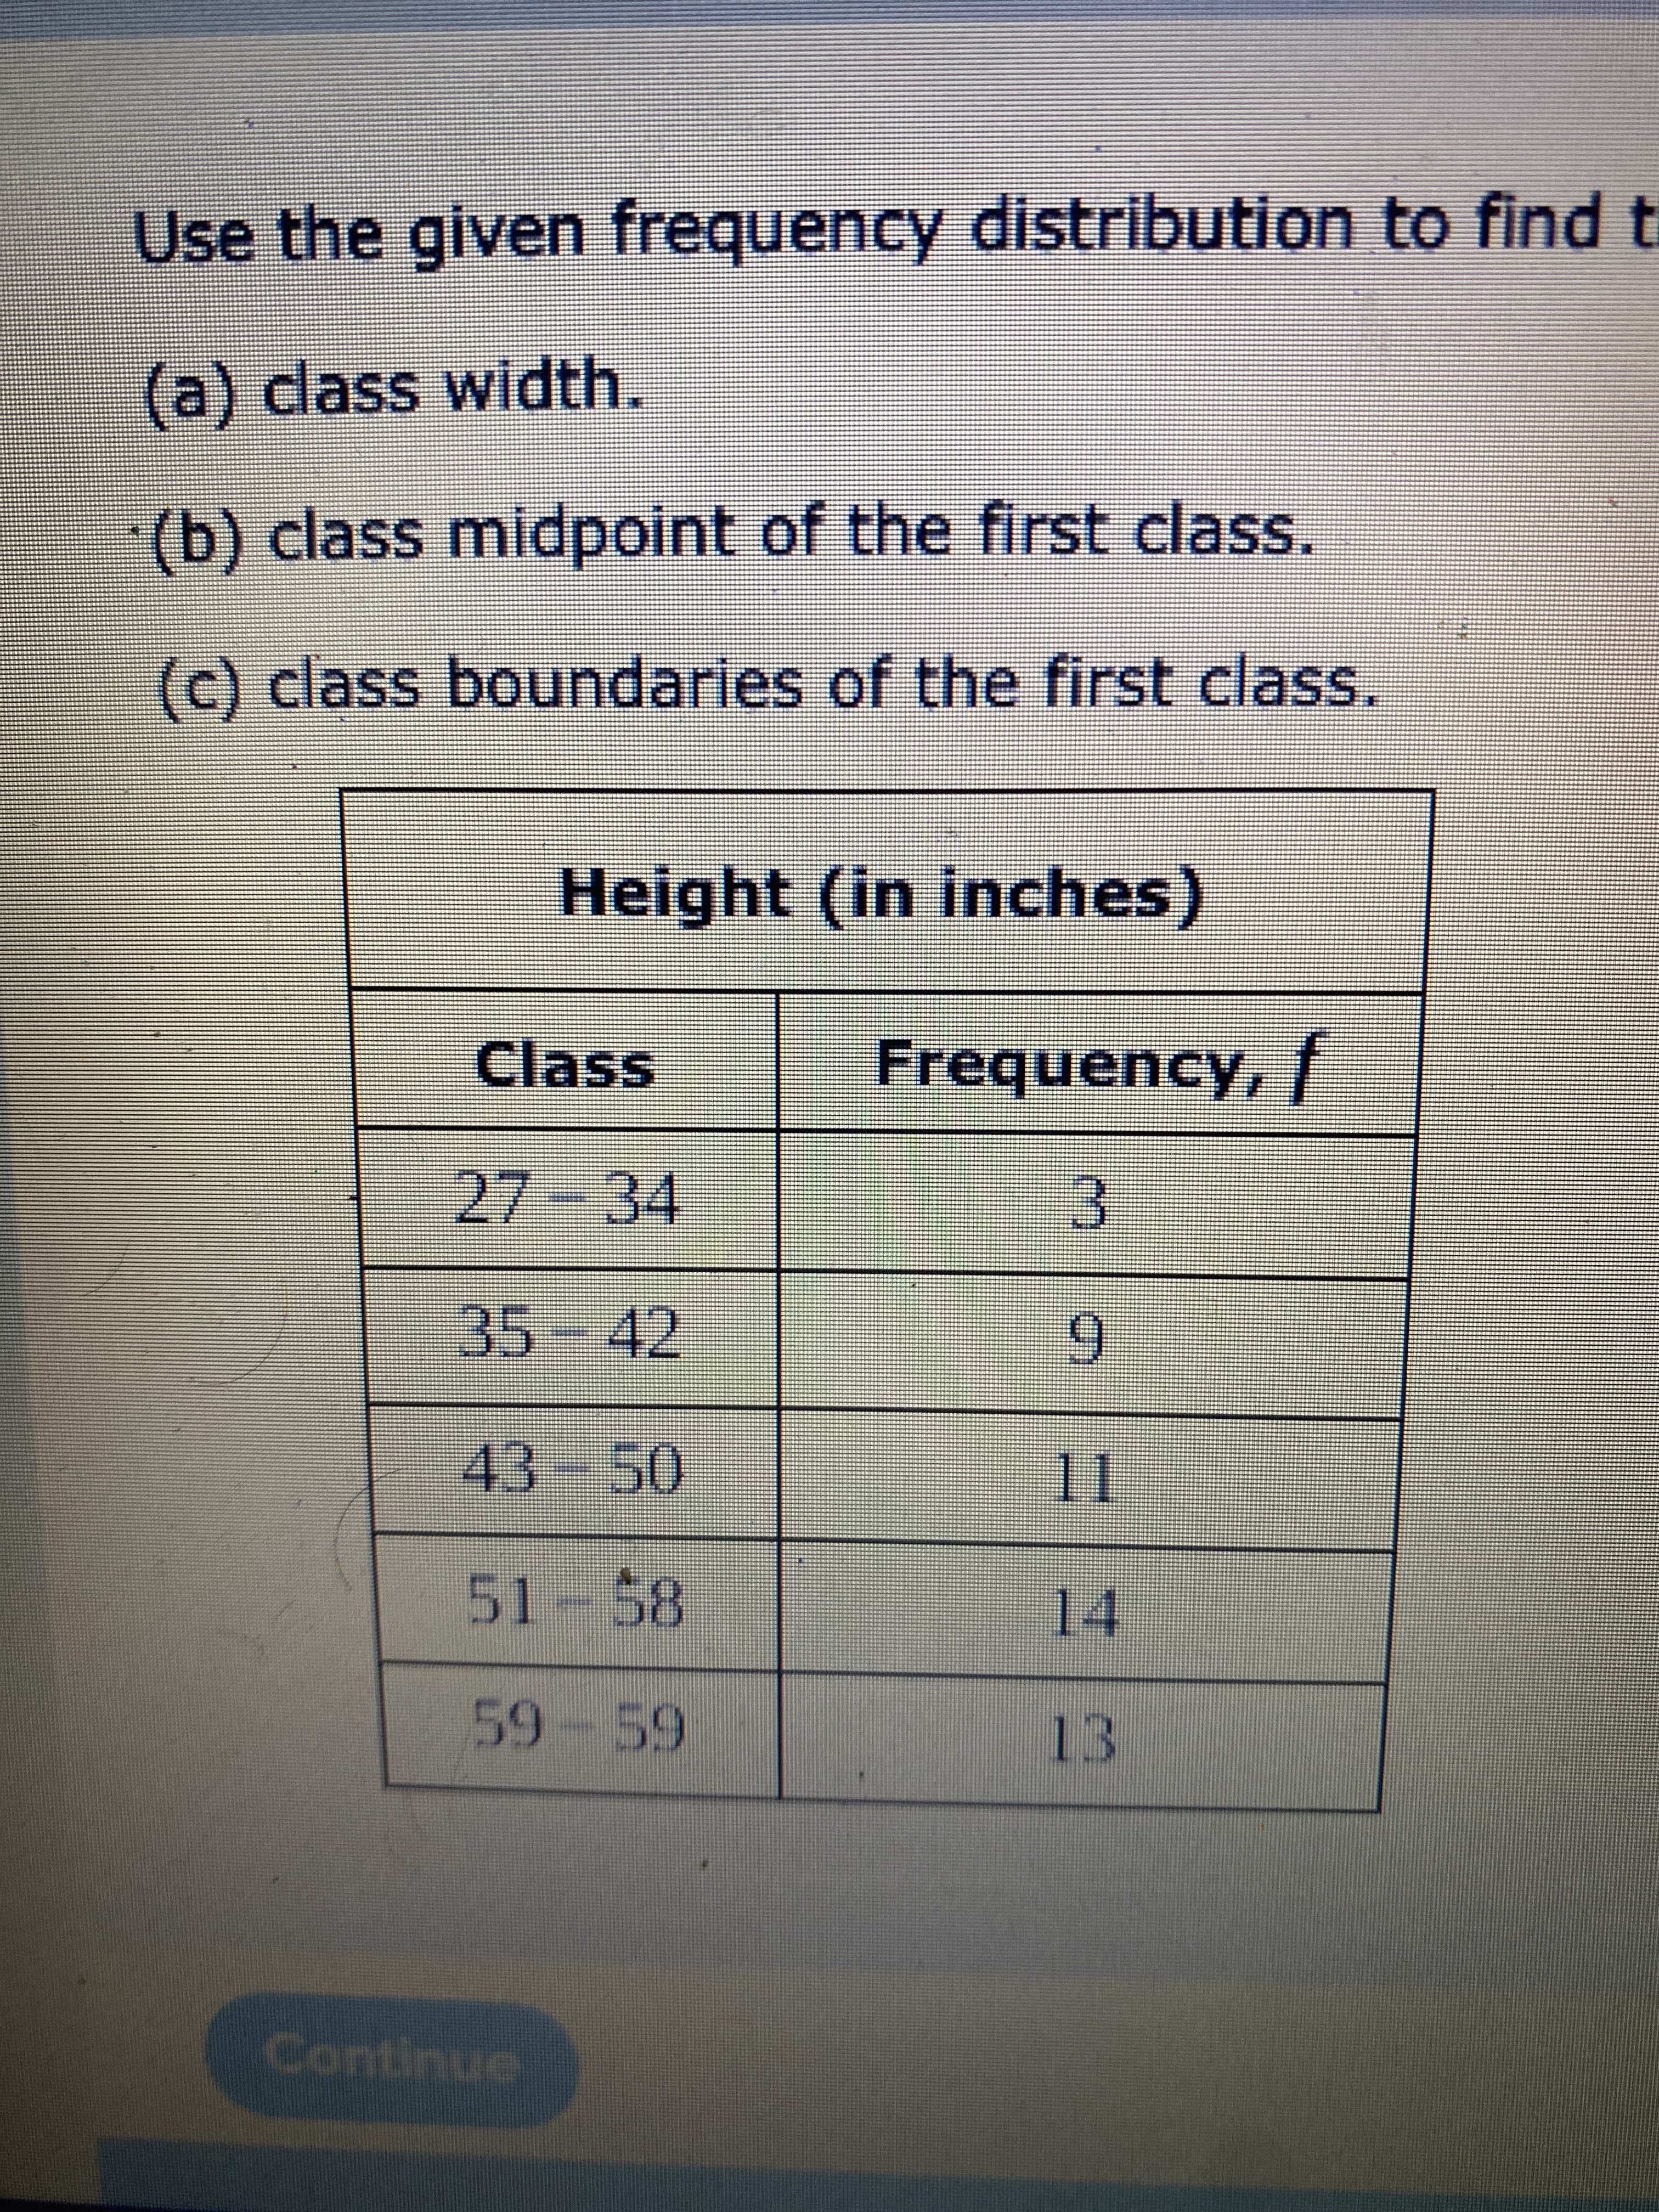 Use the given frequency distribution to find t
(a) dass width.
(b) class midpoint of the first class.
(c) class boundaries of the first class.
Height (in inches)
Class
FrequencY, T
27-34
3.
35
-42
9.
43-50
51-58
14
59-59
13
Continue
